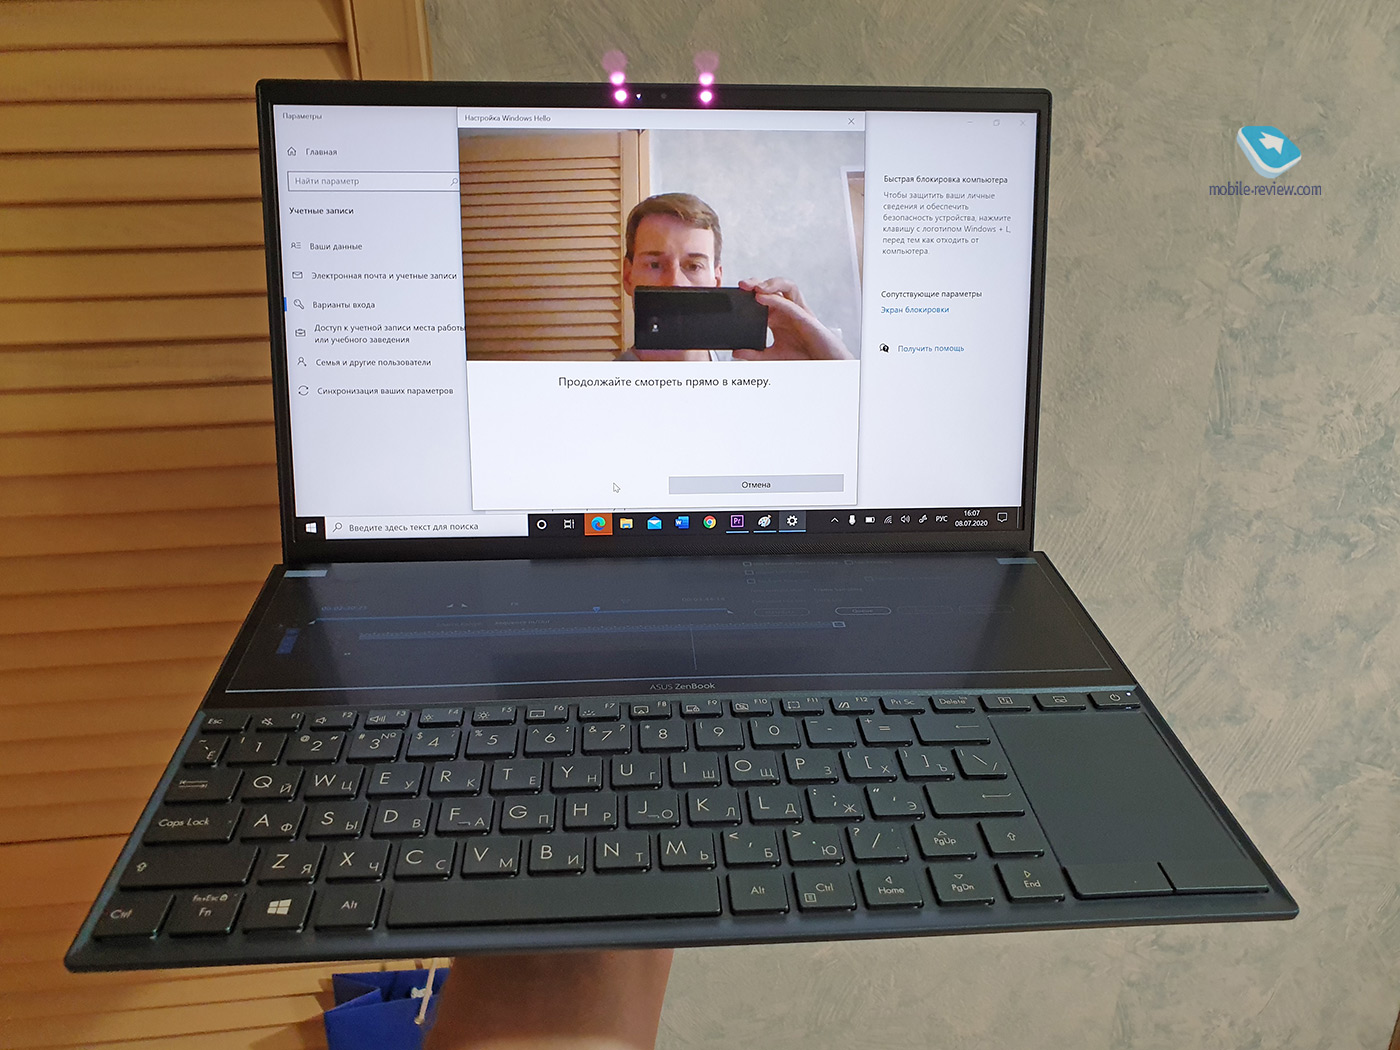 Frequently asked questions about ASUS ZenBook Duo UX481 - laptop with two screens